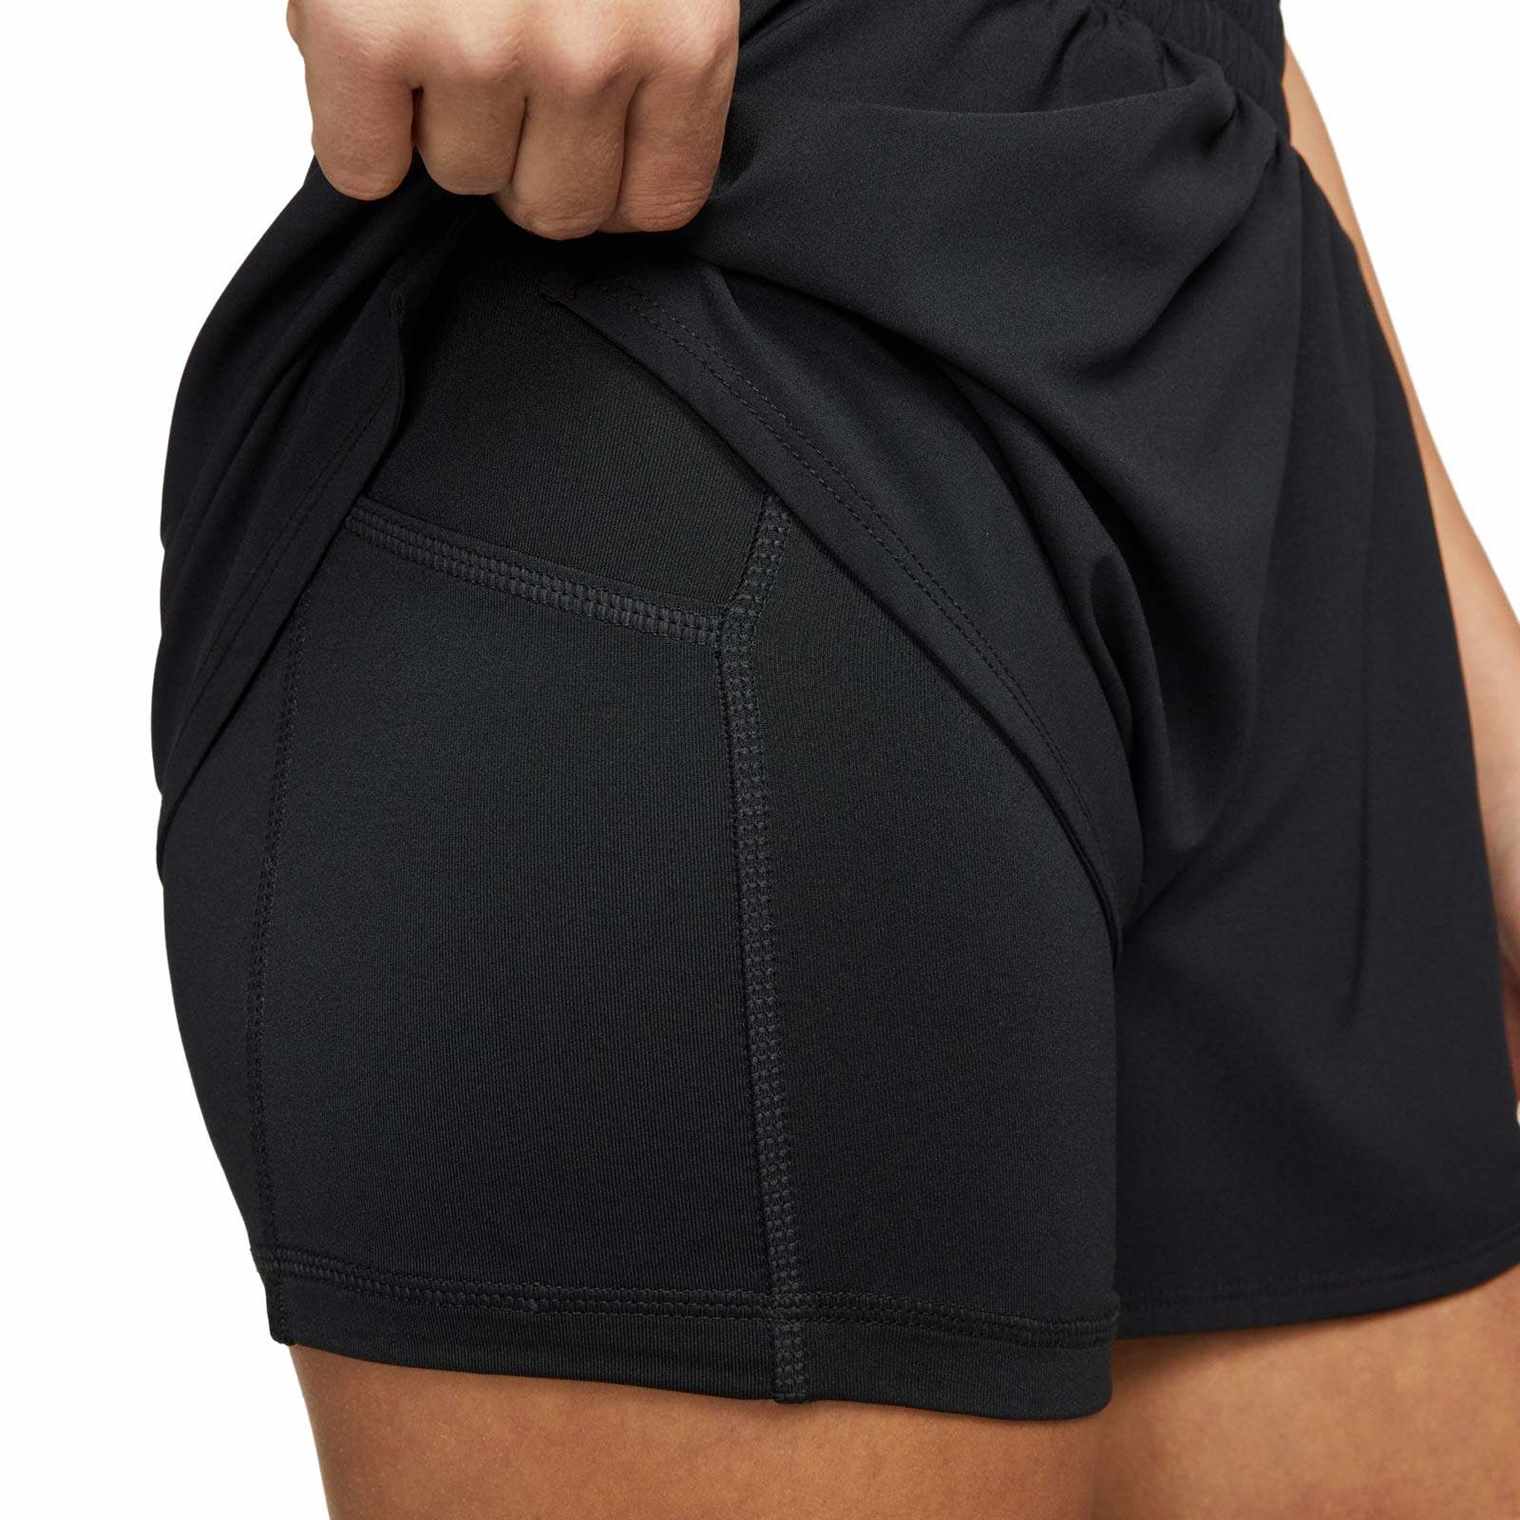 NIKE ONE WOMENS DRI-FIT HIGH-WAISTED 3" 2-IN-1 SHORTS